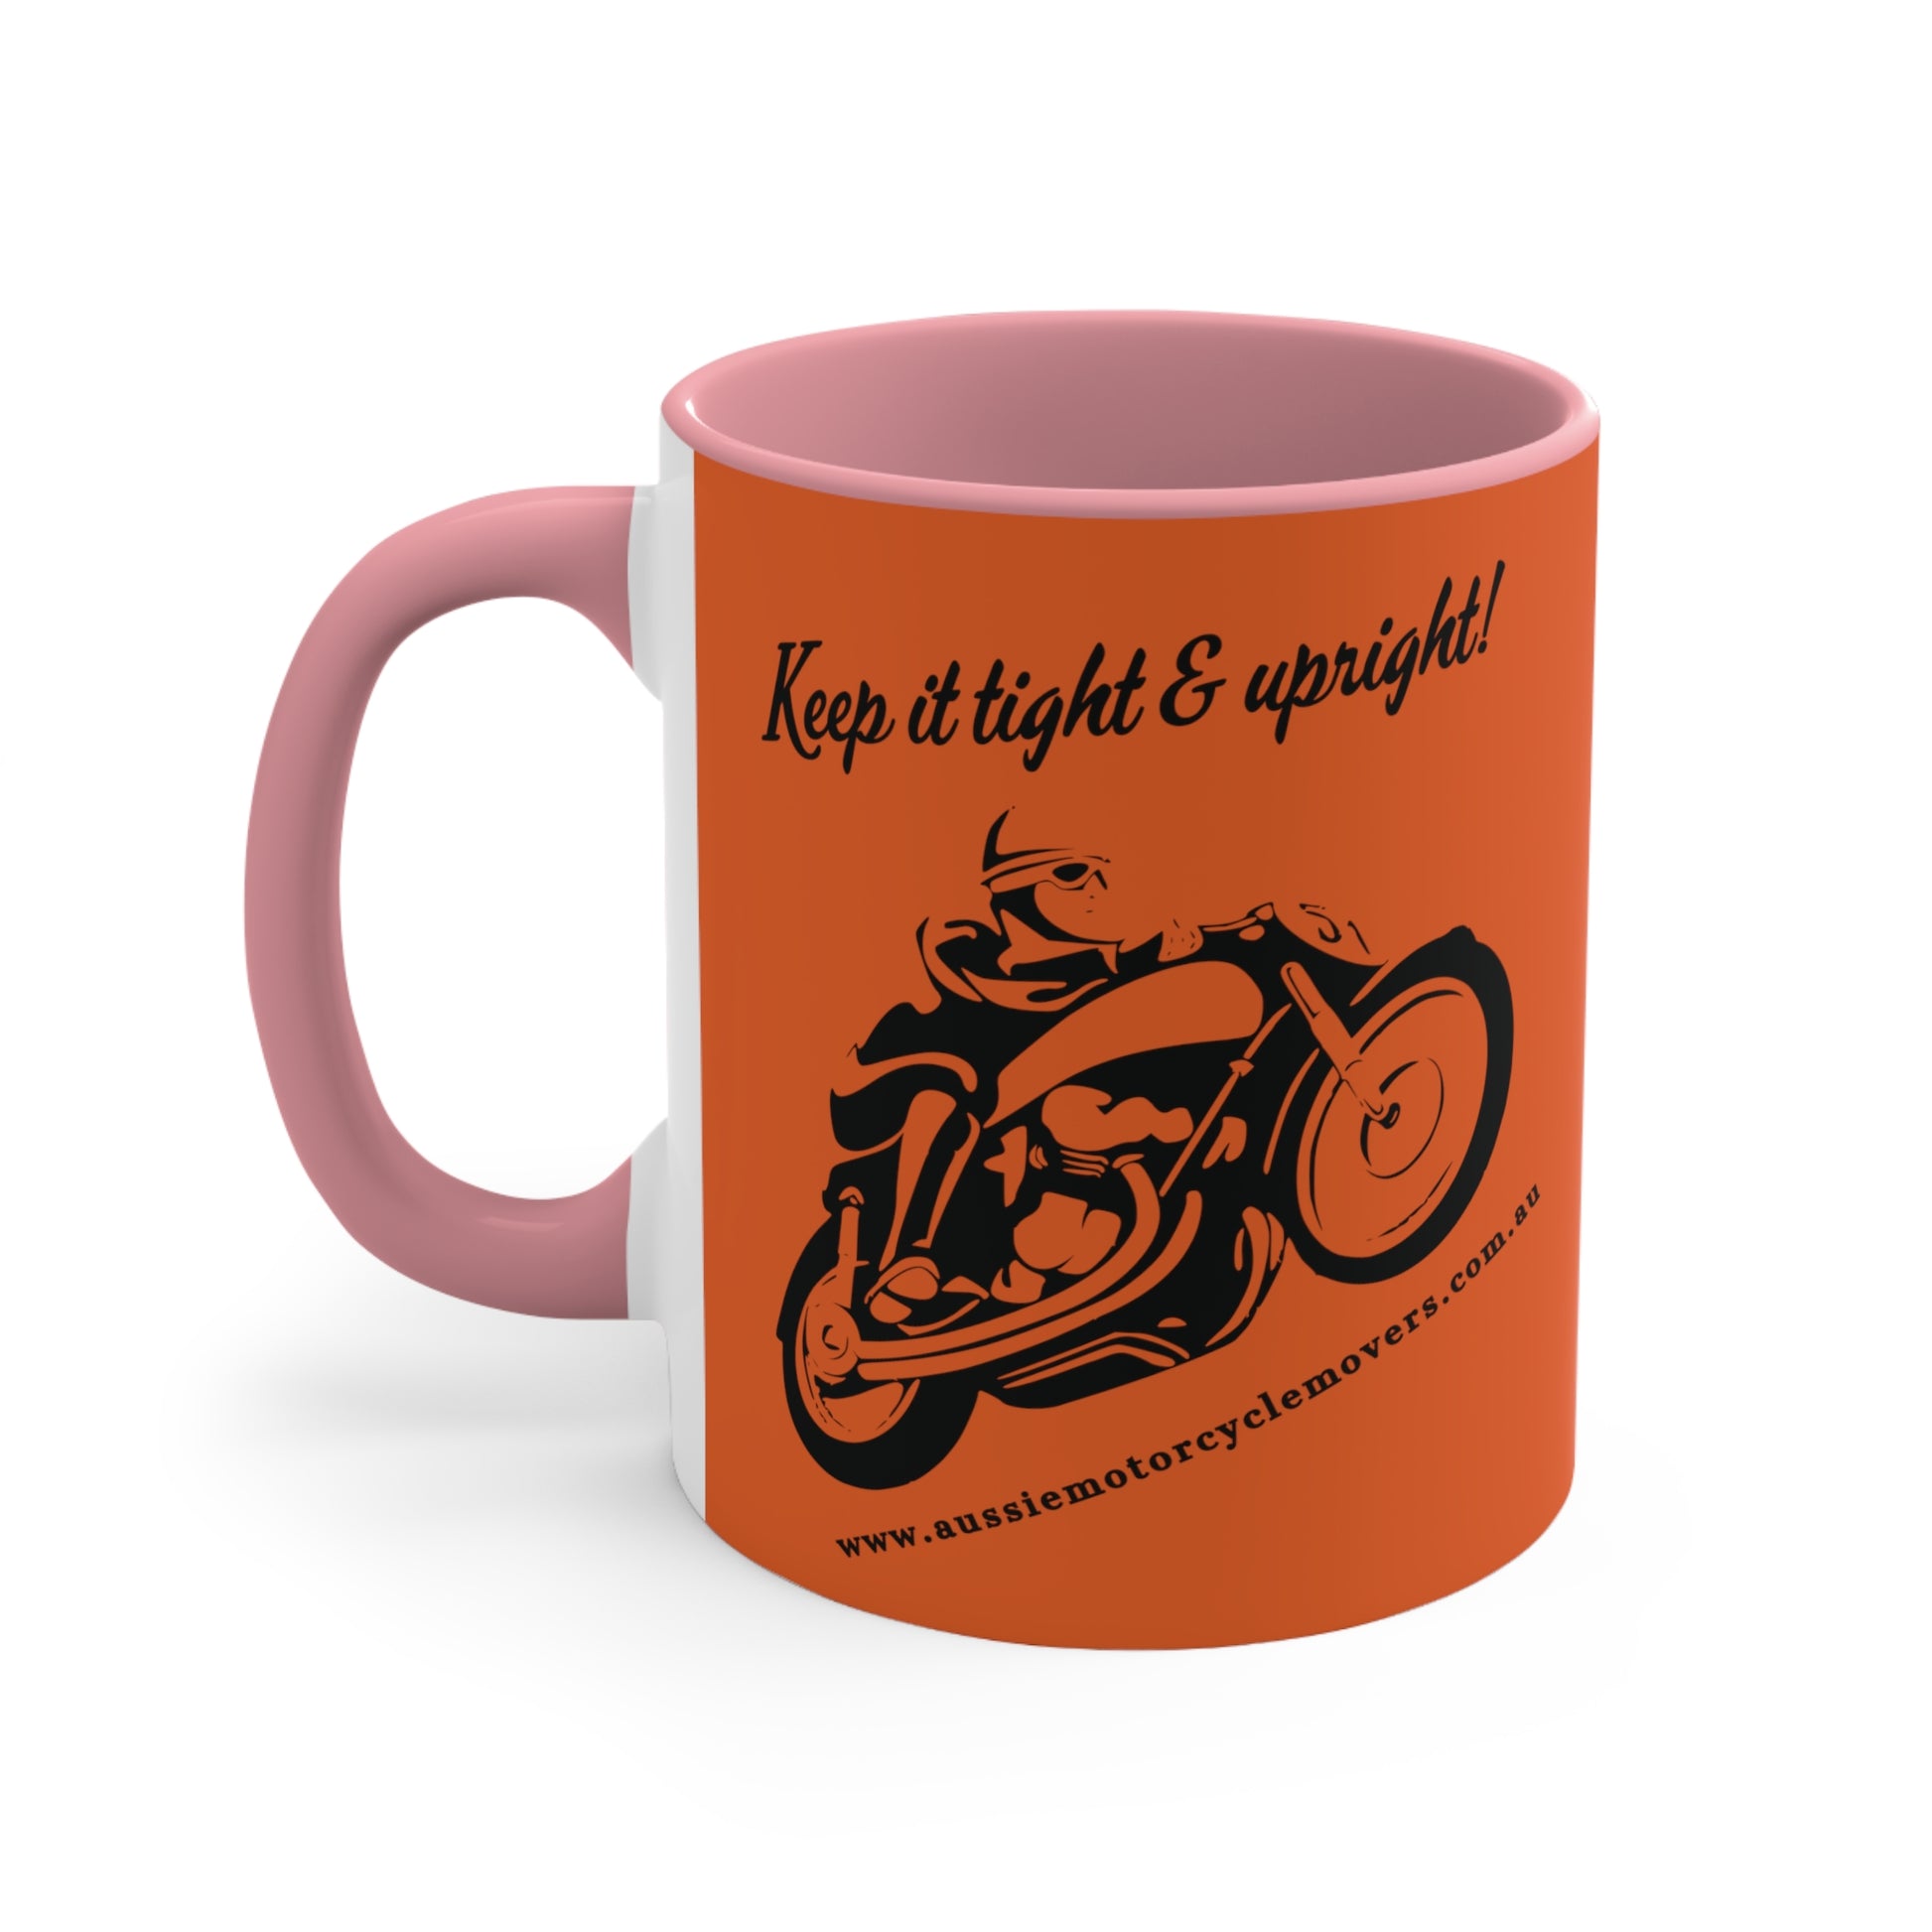 Aussie Motorcycle Movers Supporter Colorful Accent Mugs, 11oz, Mick Train legendary saying mug Mug   